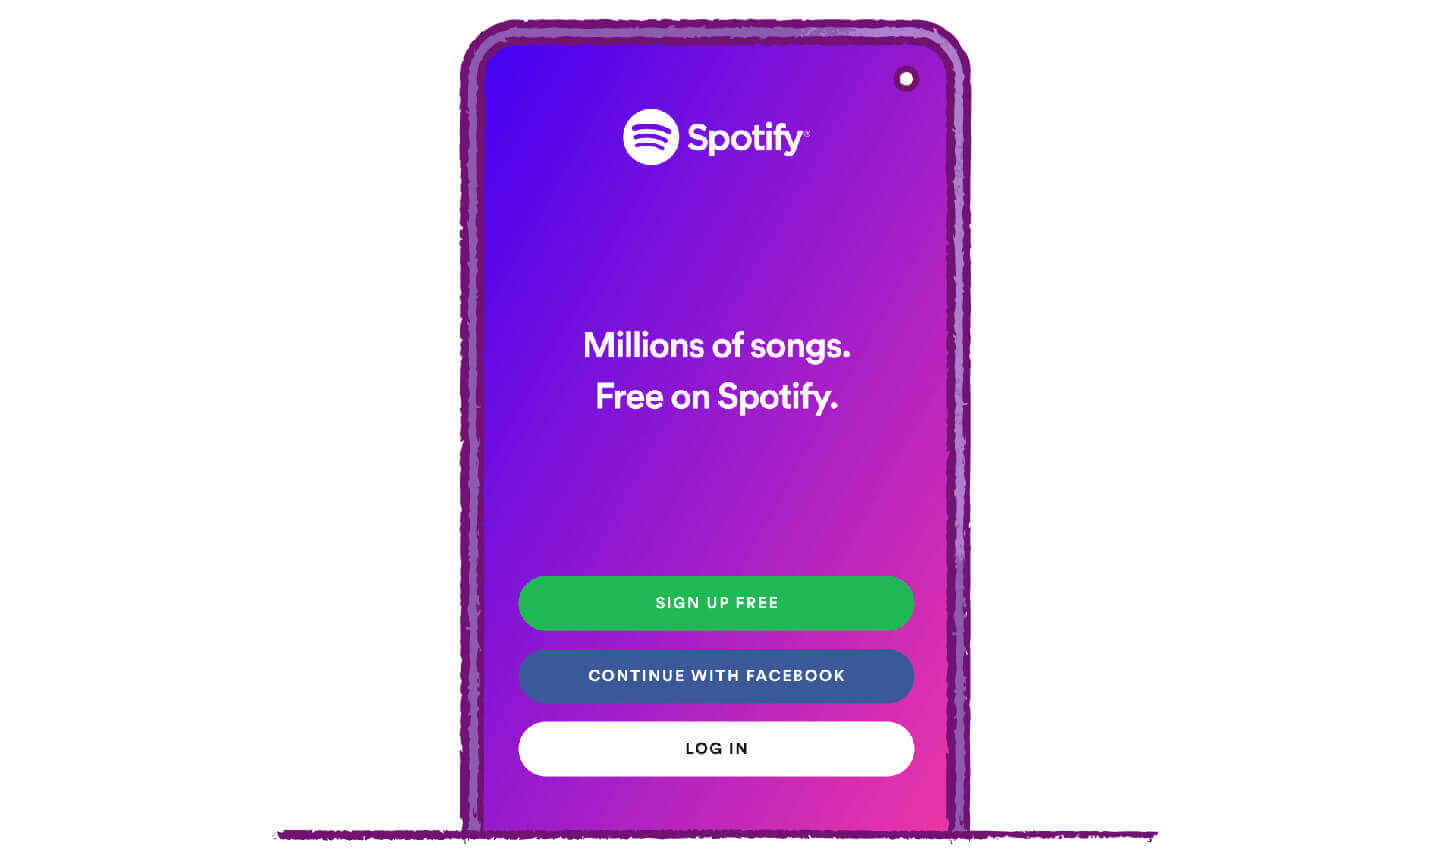 spotify call to action buttons examples with beautiful purple gradient design and simple hierarchy